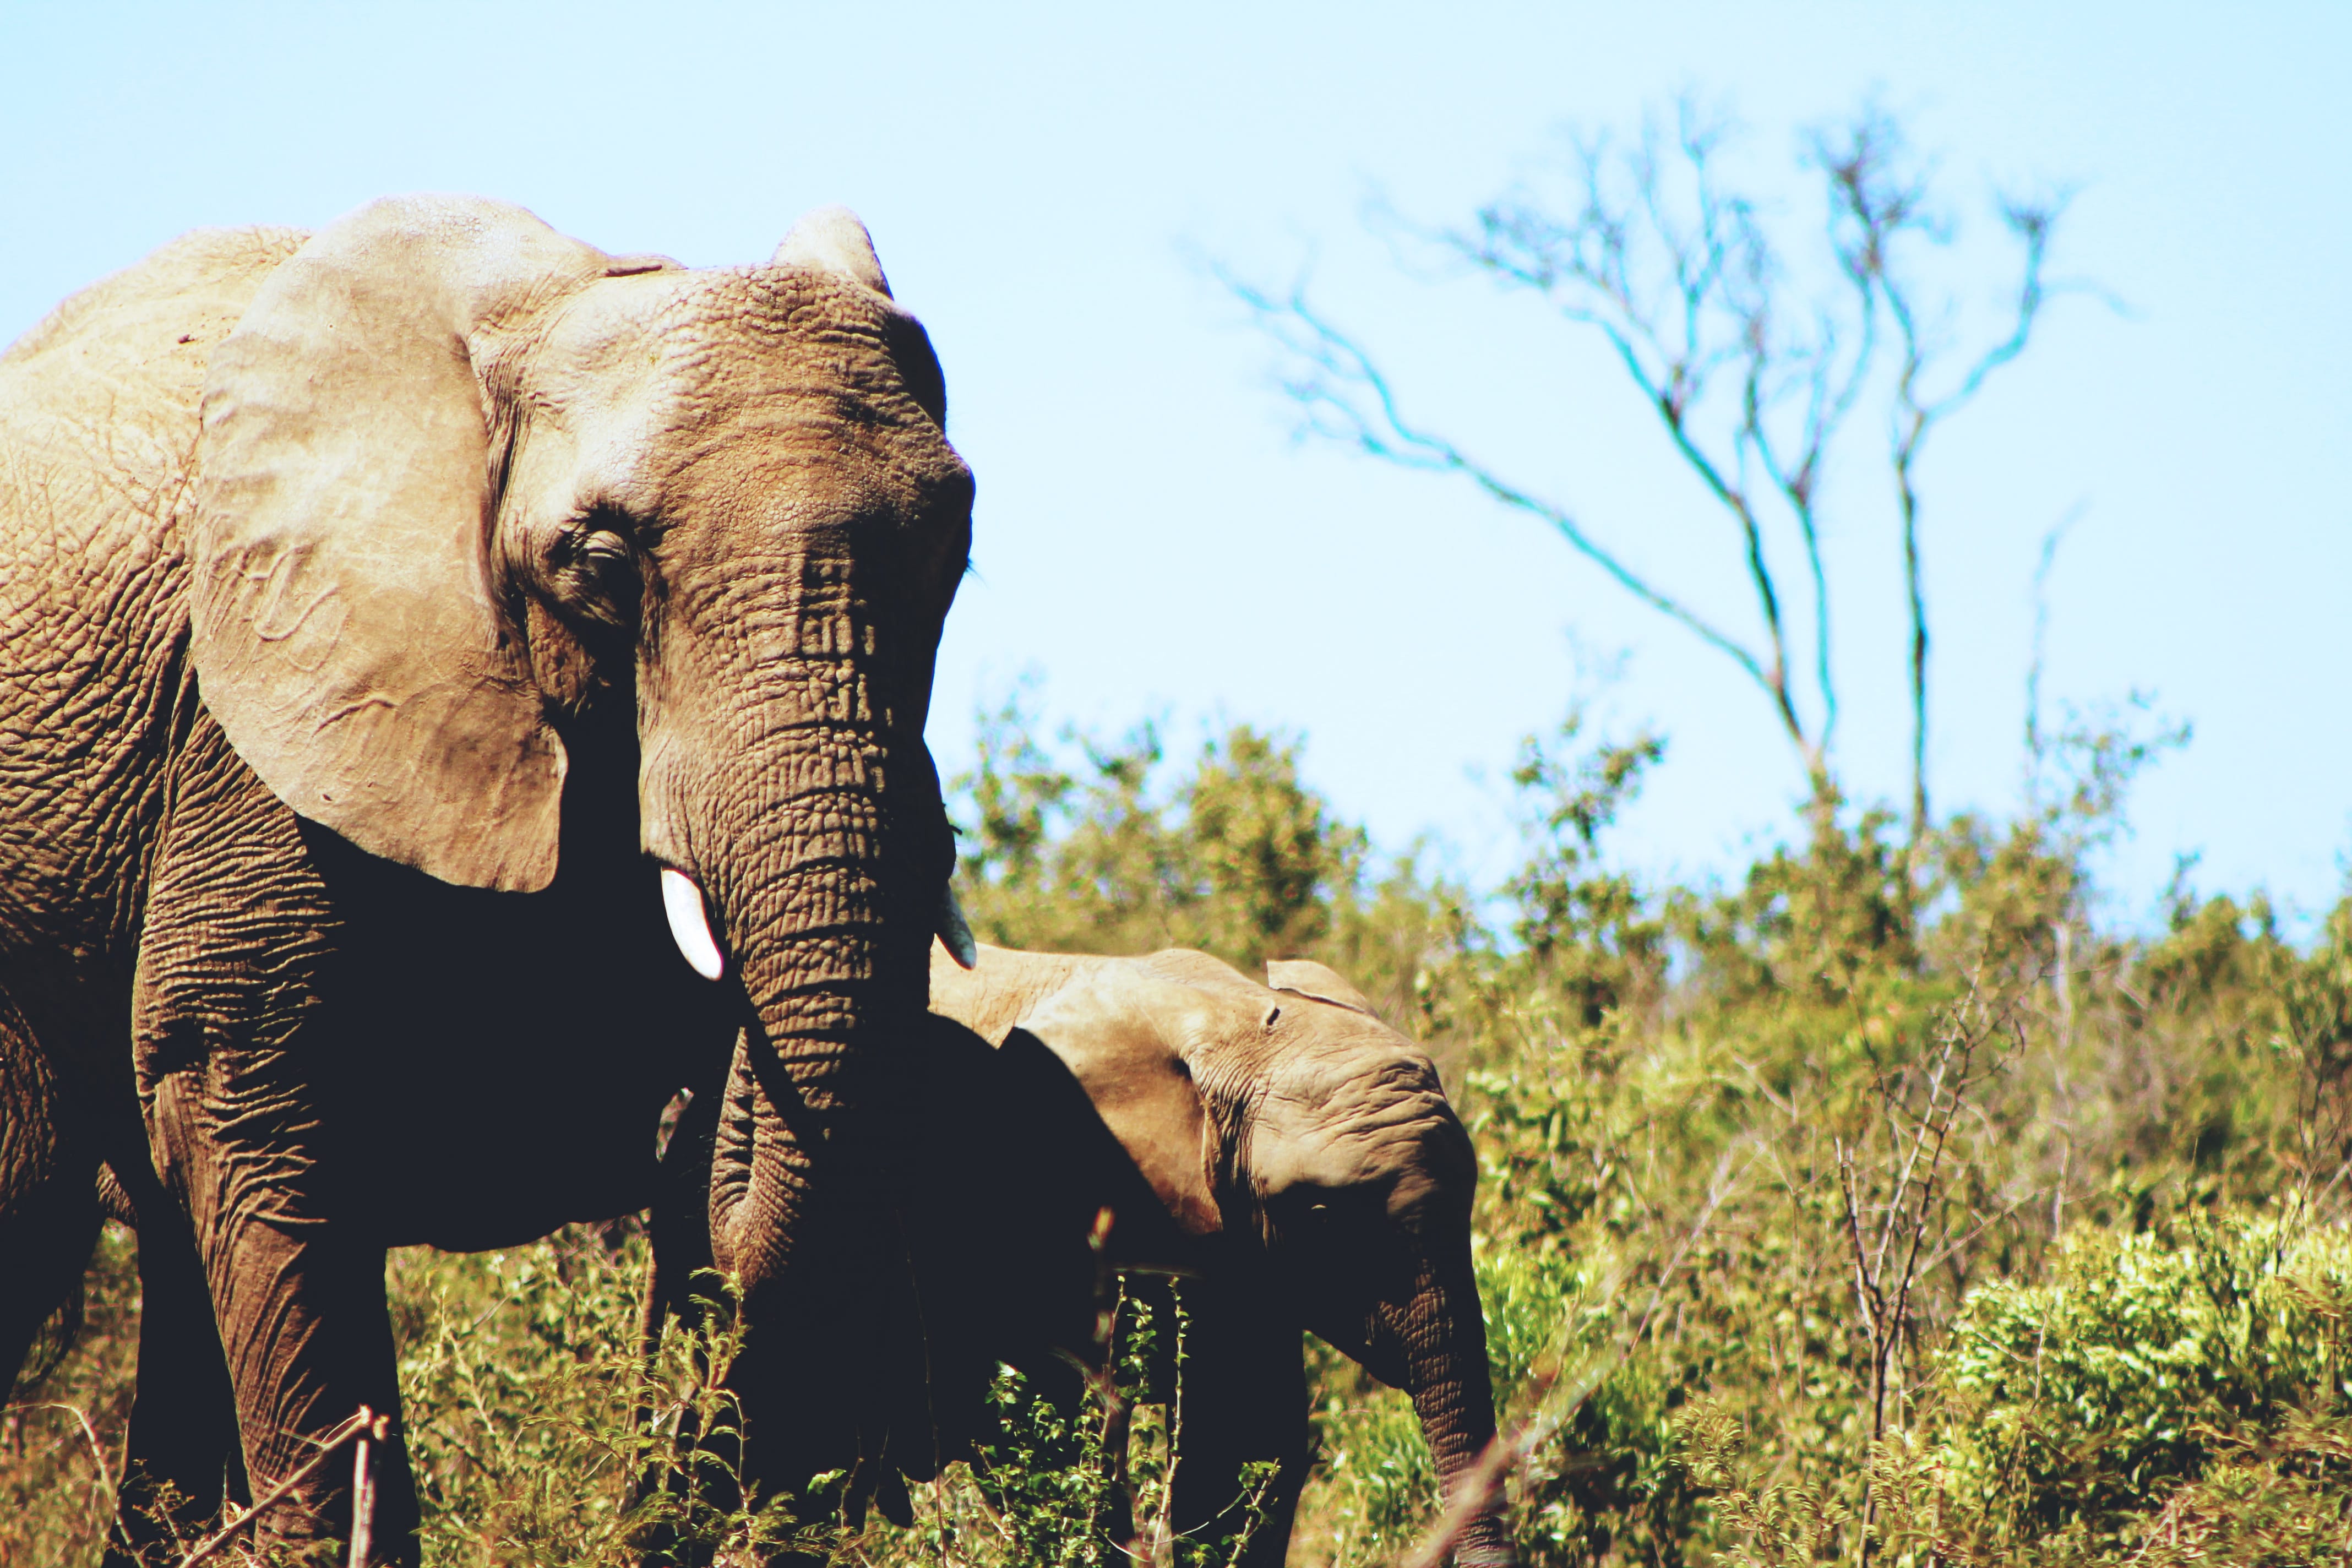 The ivory trade isn’t just a disaster for elephants. It threatens our future too